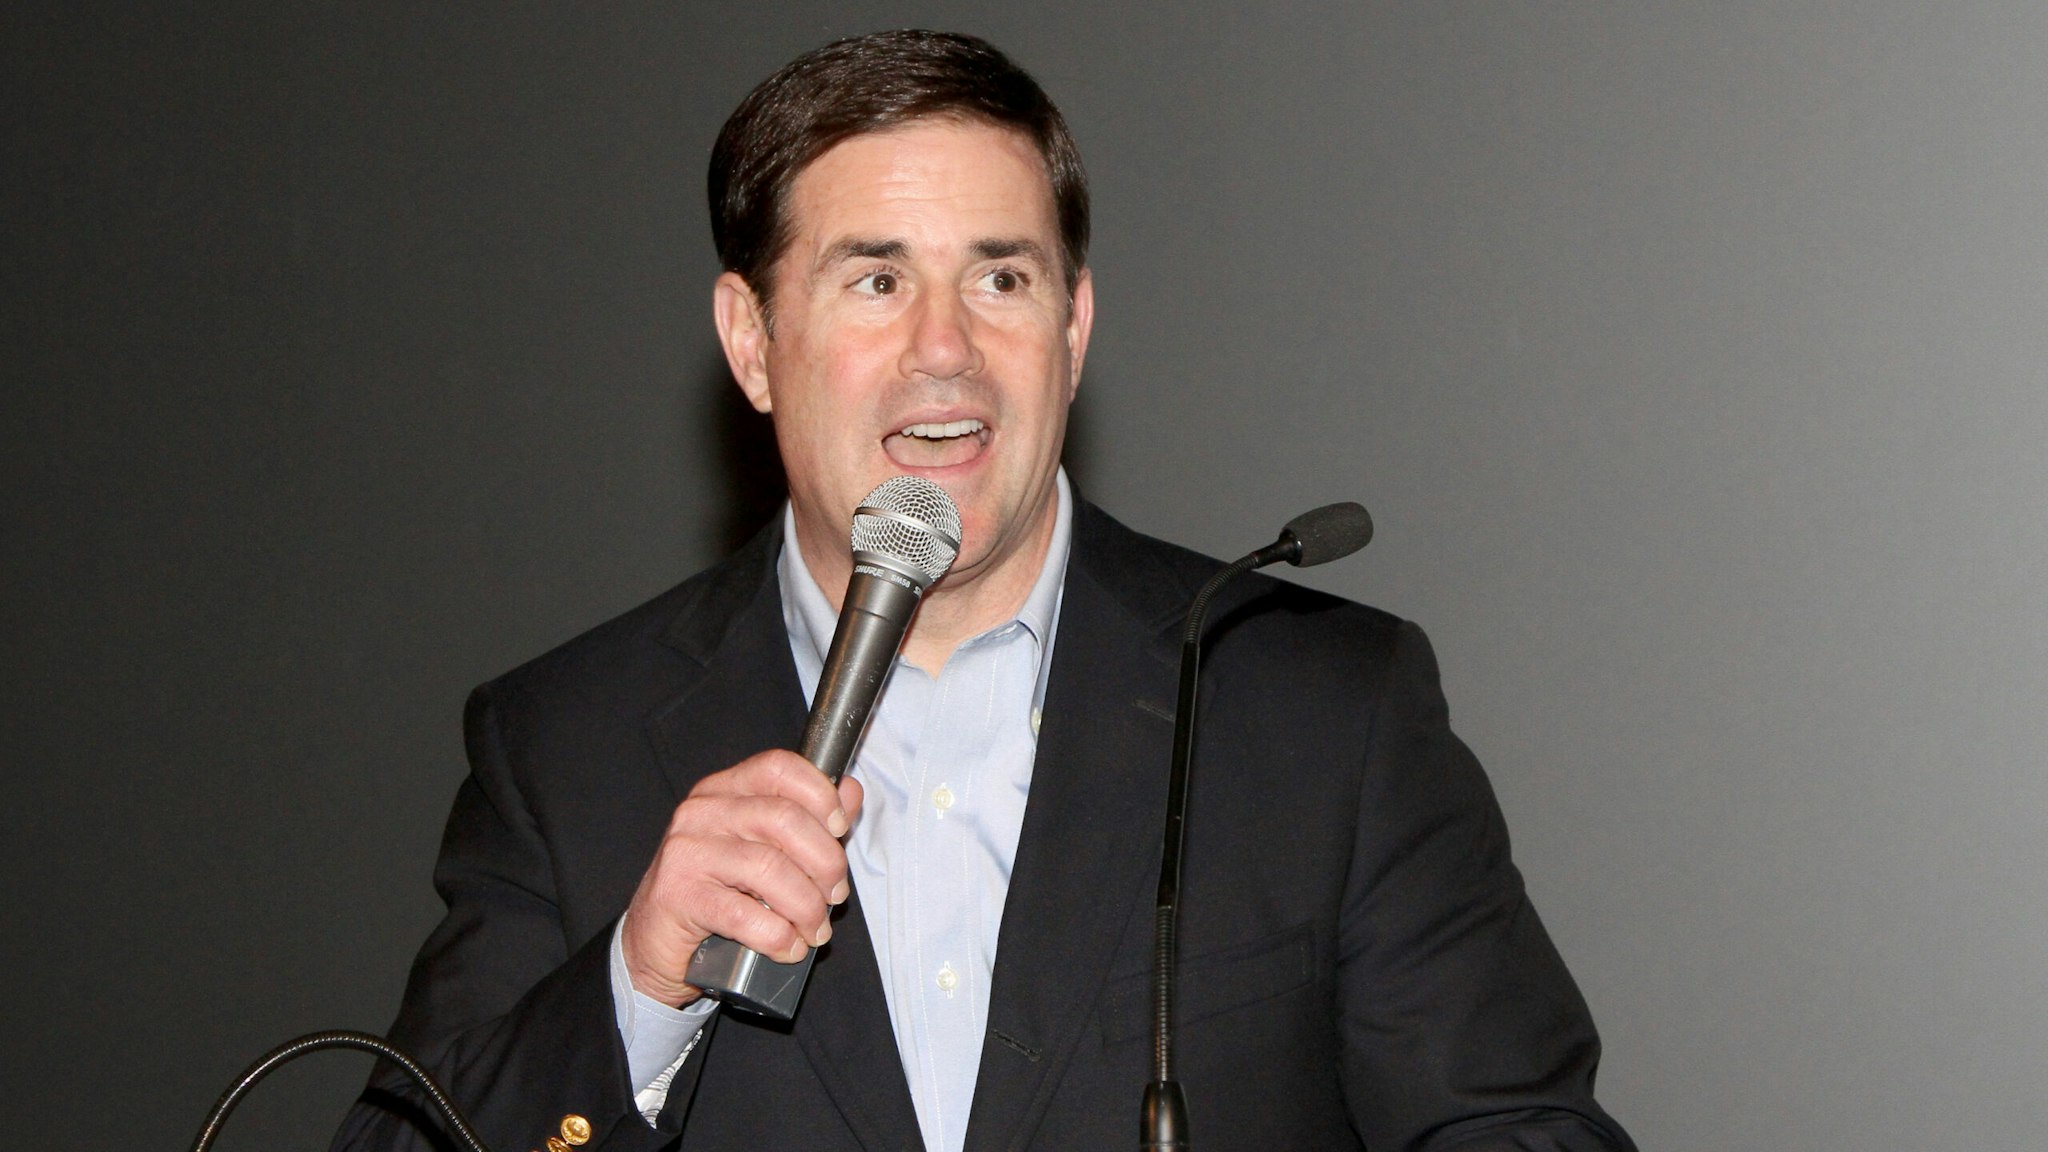 PHOENIX, AZ - JANUARY 31: Arizona Governor Doug Ducey speaks at the 28th Annual Leigh Steinberg Super Bowl Party at Arizona Science Center on January 31, 2015 in Phoenix, Arizona.